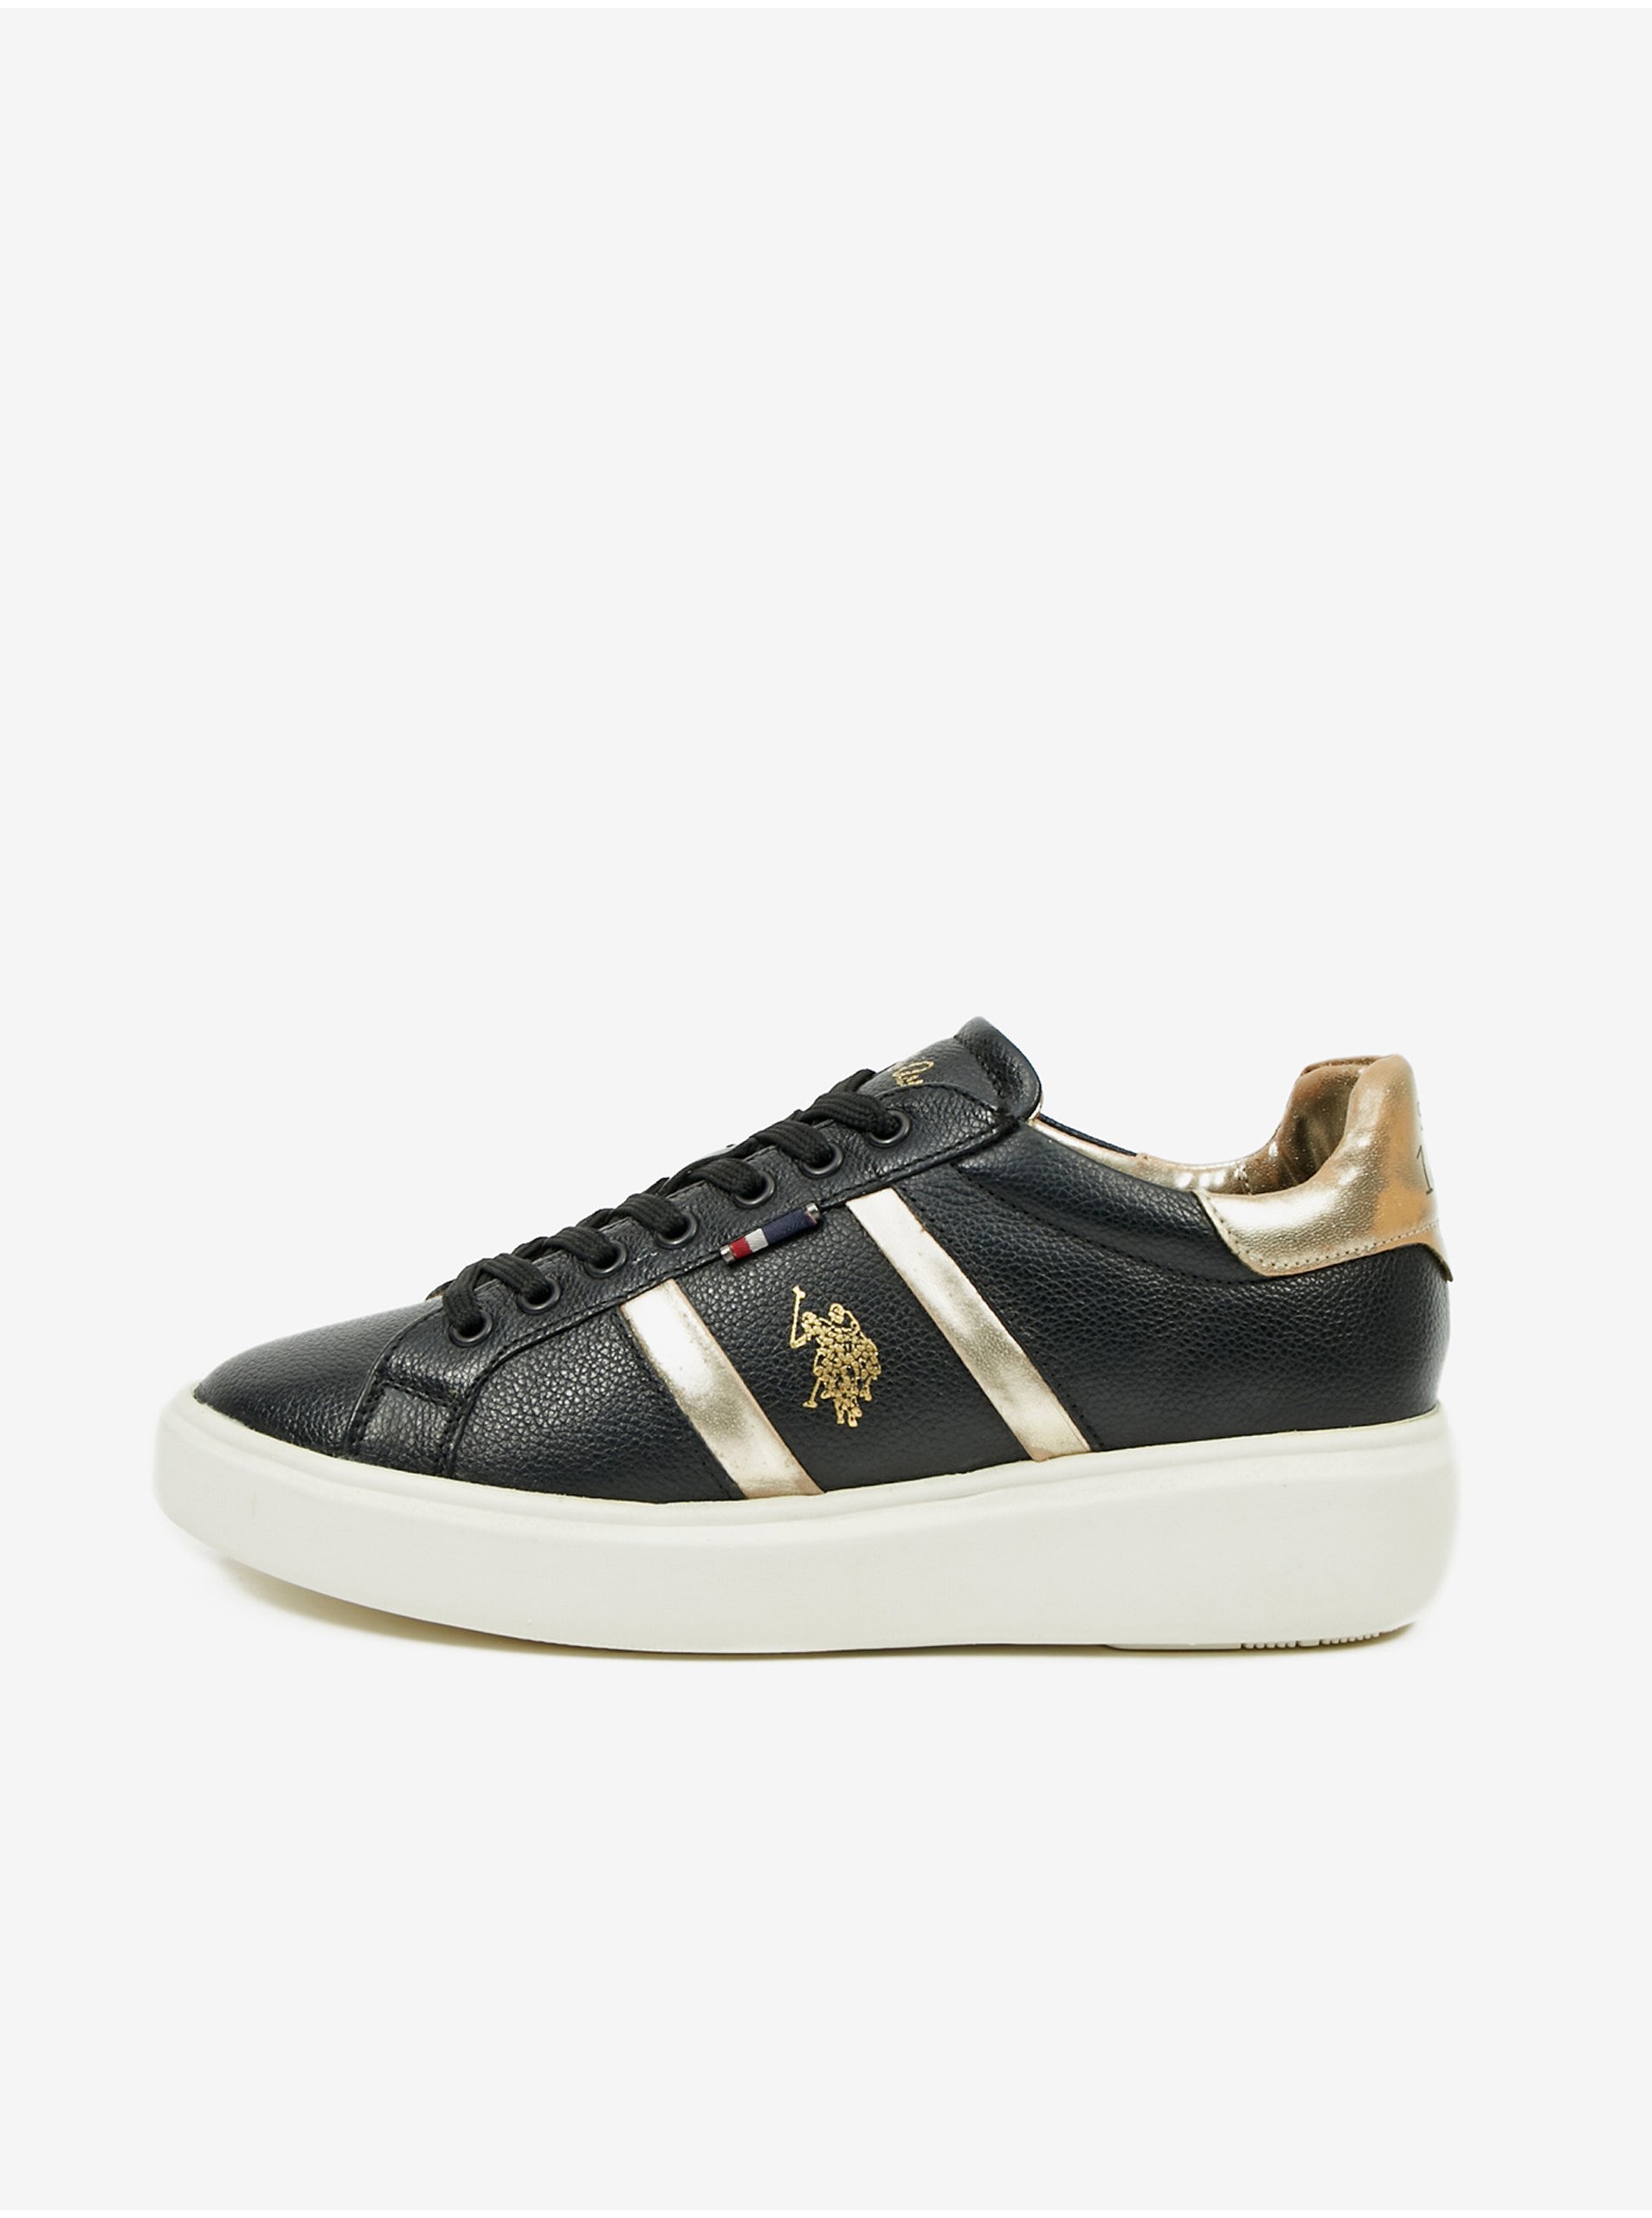 Gold and Black Women's Leather Shoes U.S. Polo Assn. - Women